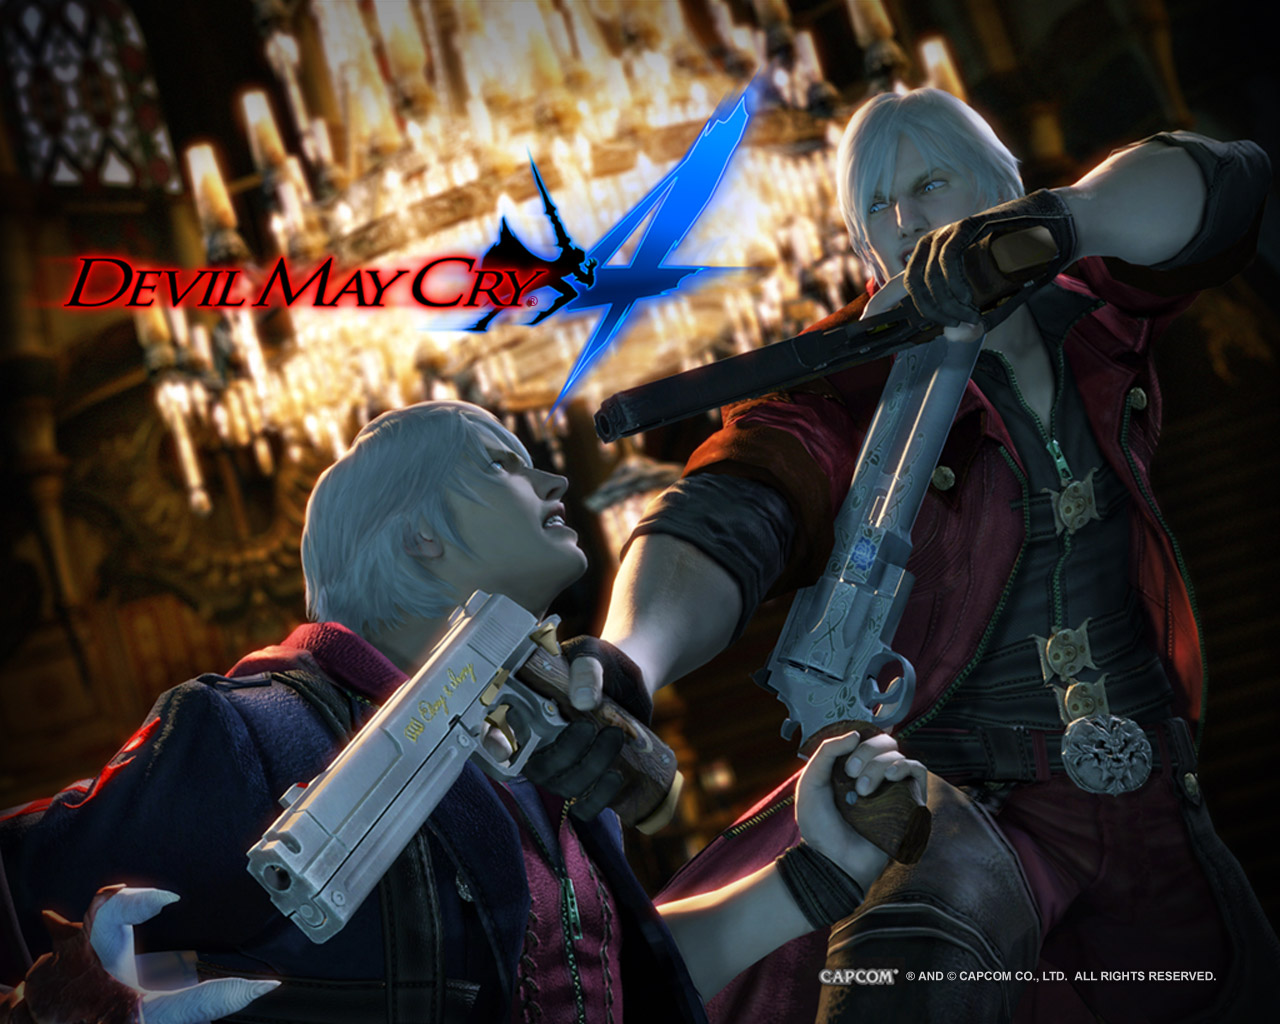 Devil May Cry 4 Wallpapers - HD Wallpapers 57163